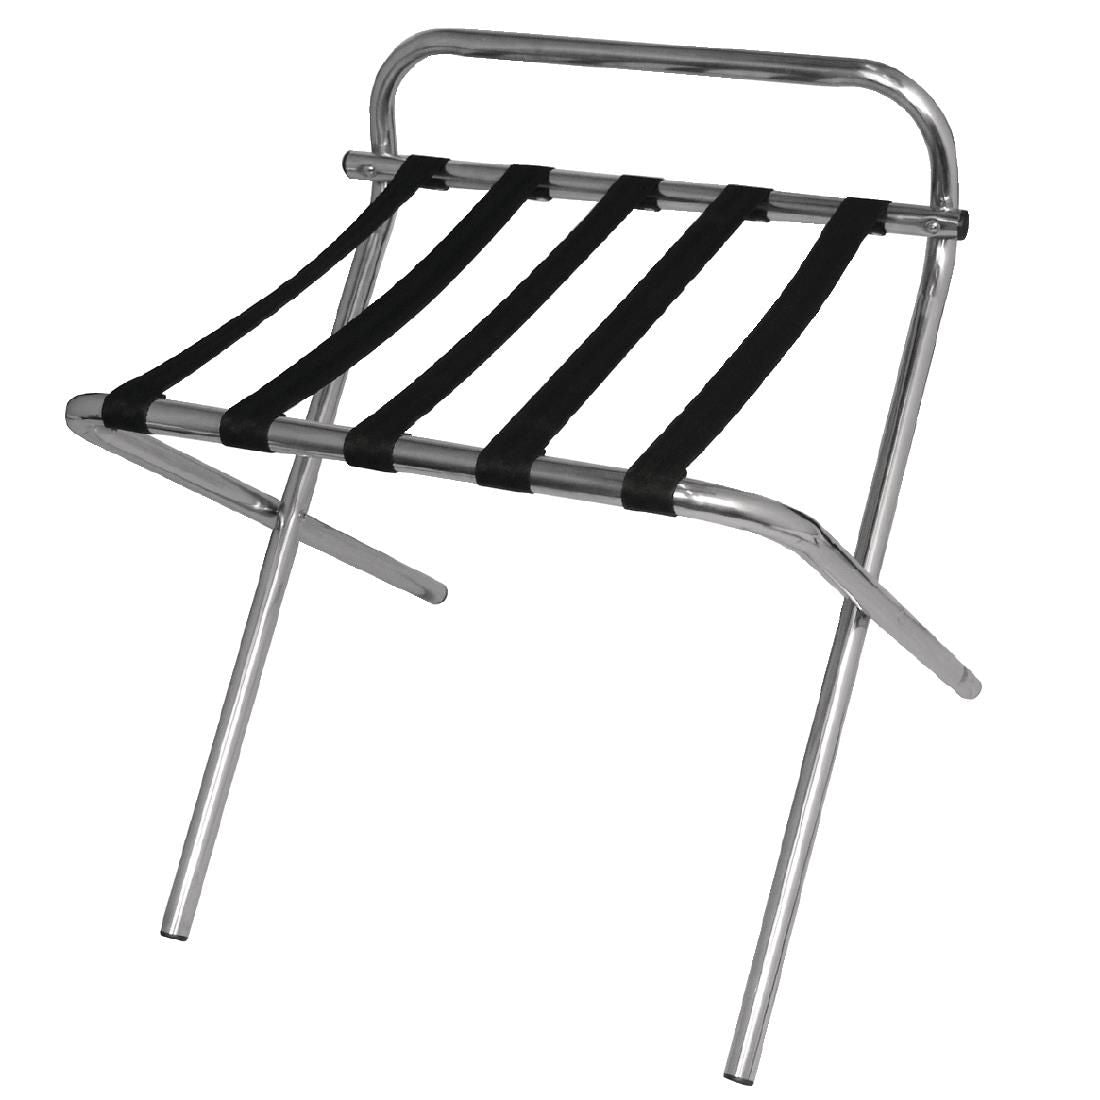 CB510 Bolero Rounded Luggage Rack JD Catering Equipment Solutions Ltd